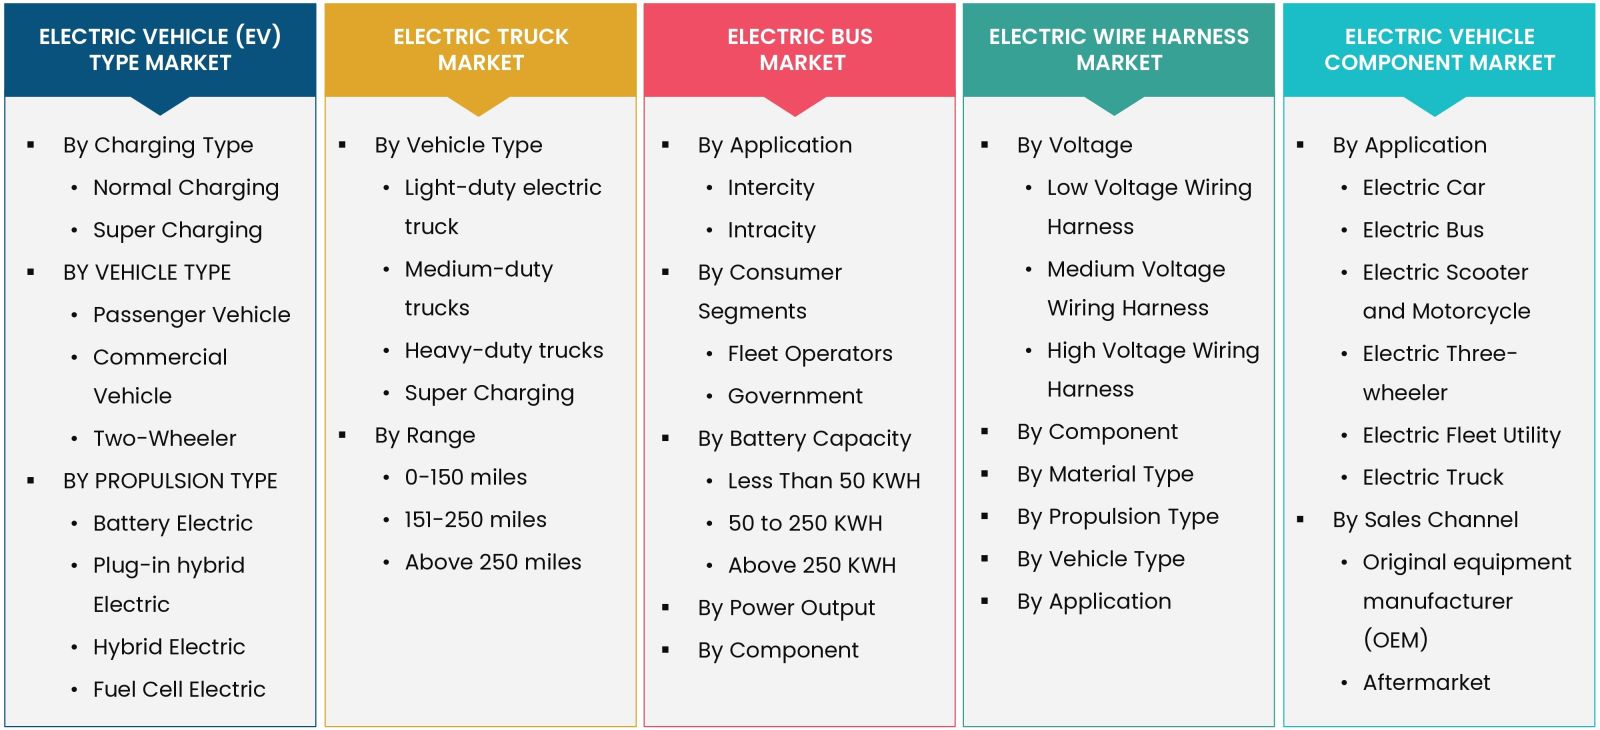 Electric Vehicle Market Coverage 